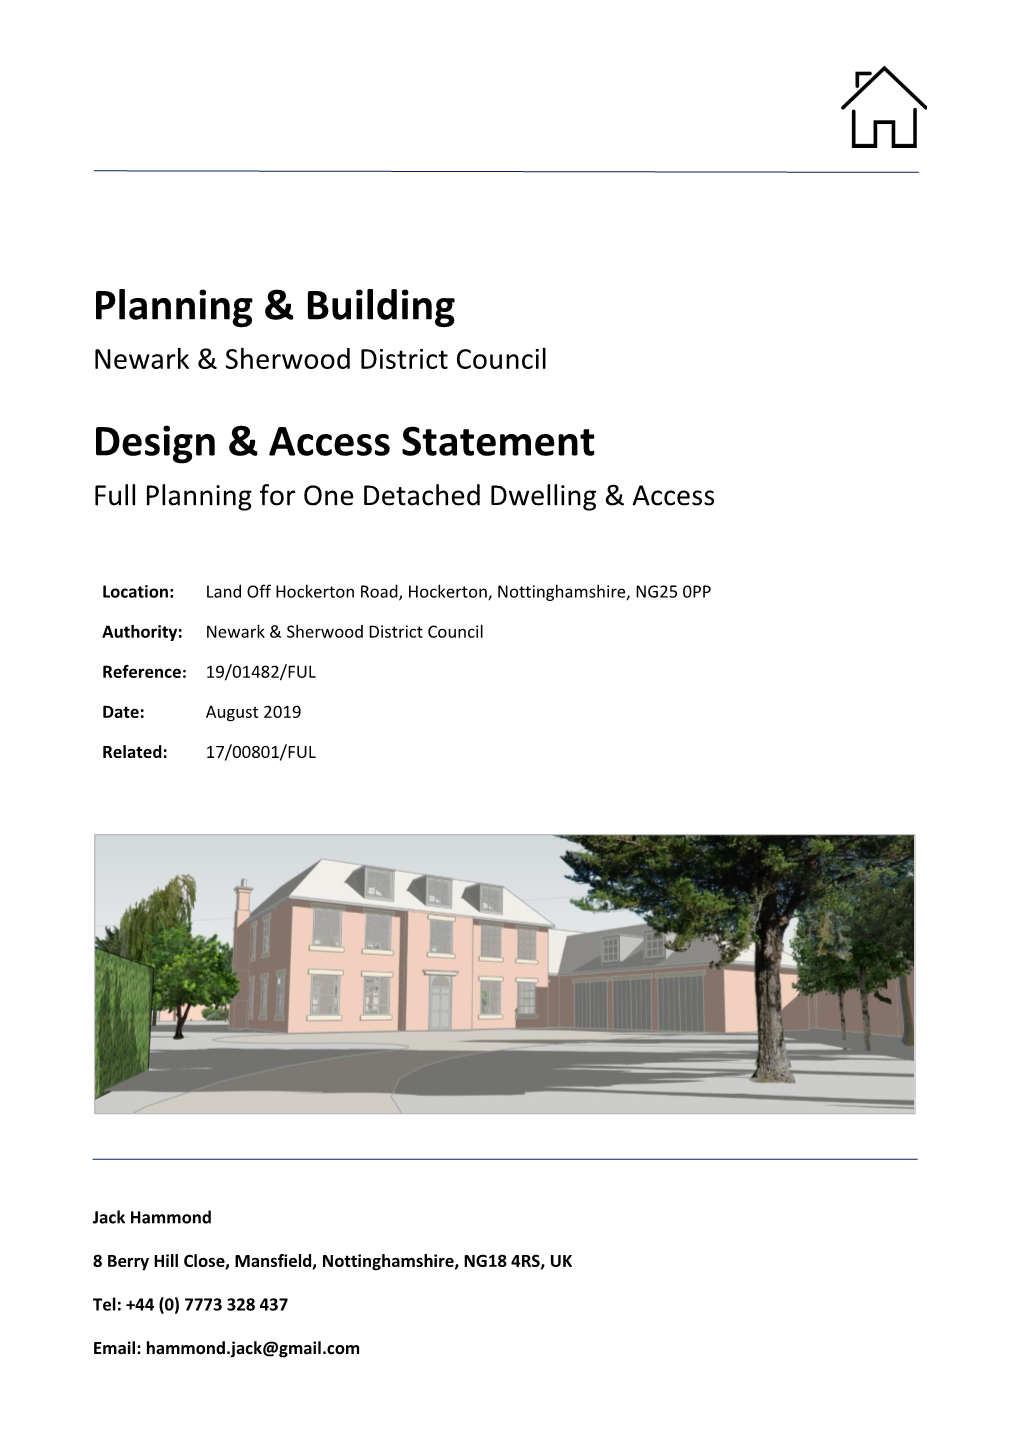 Full Planning for One Detached Dwelling & Access